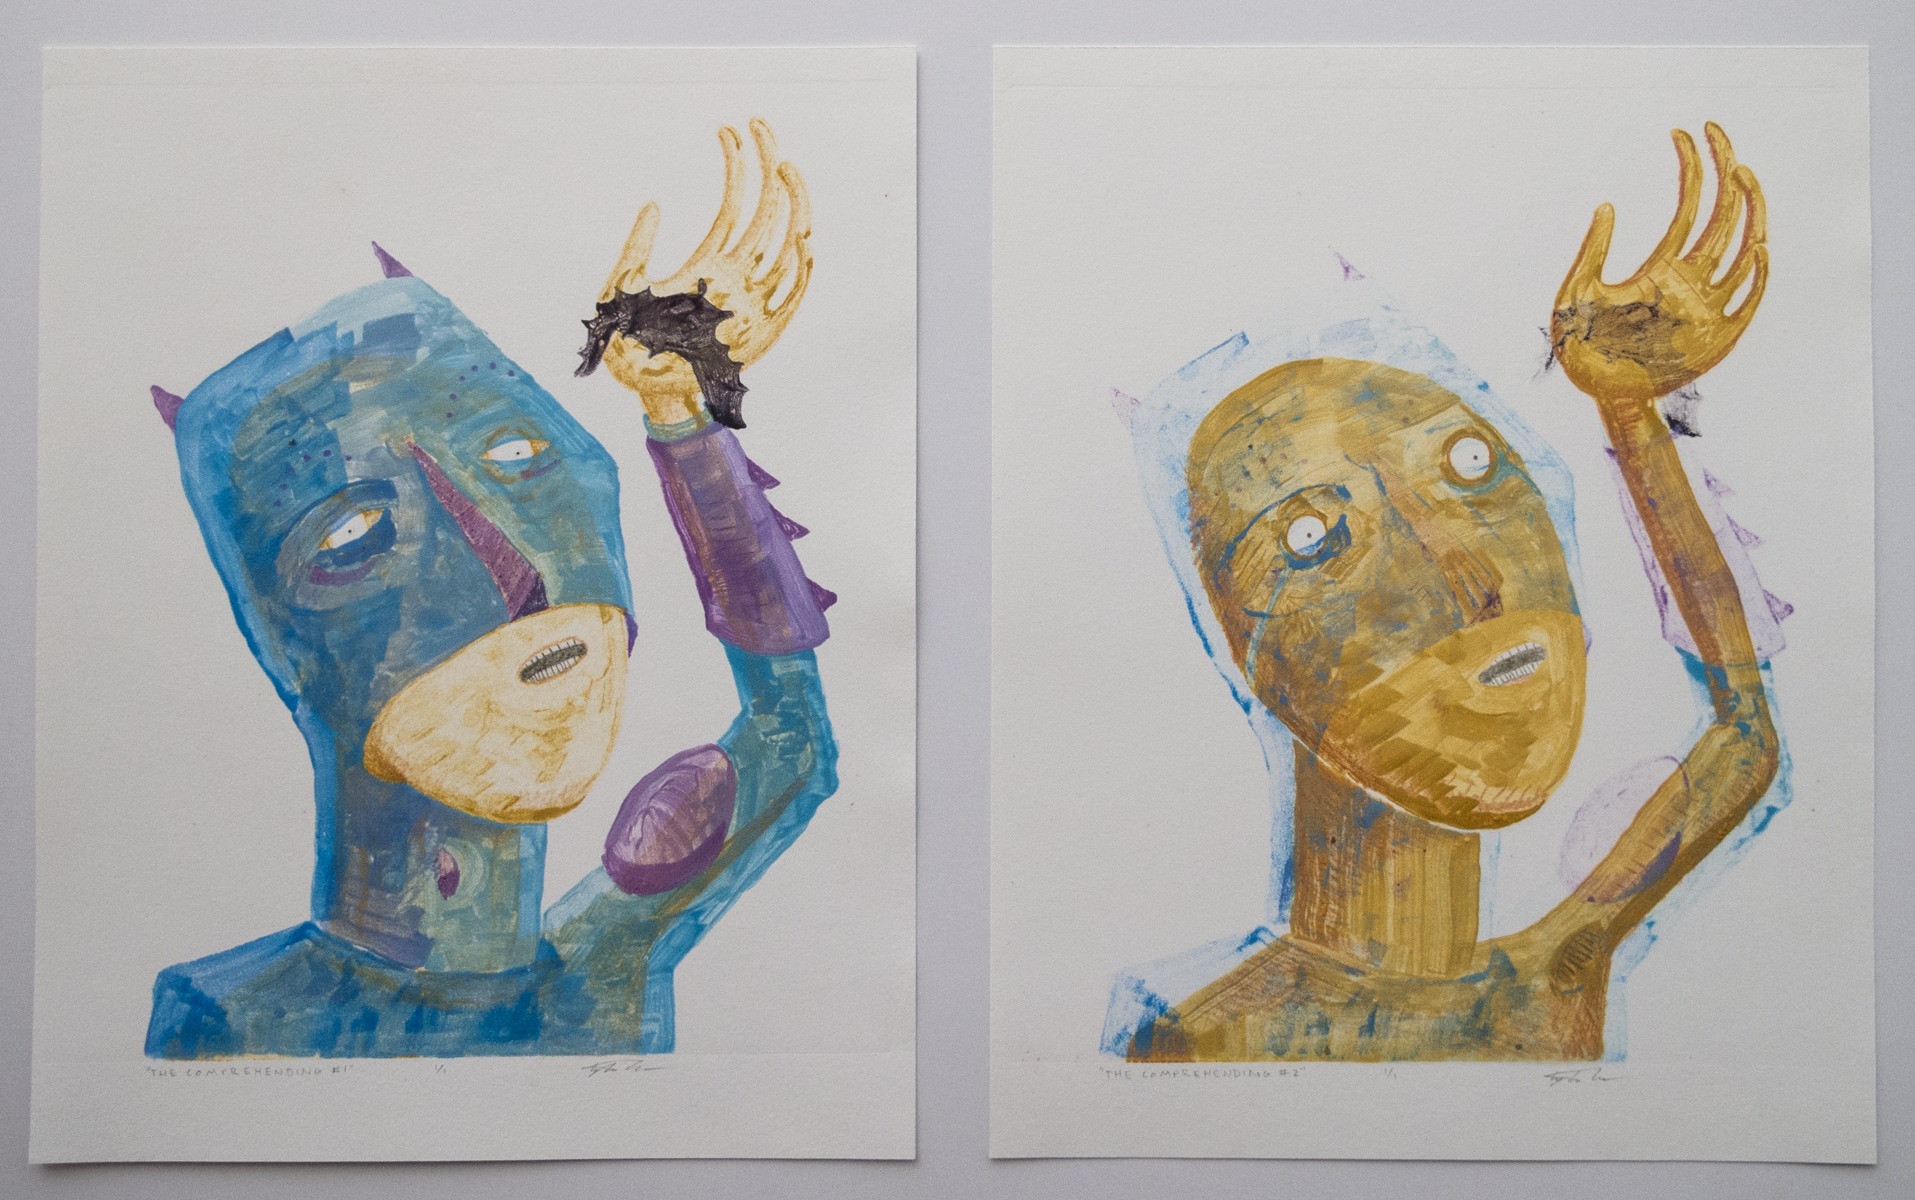  Tyler Green   The Comprehending 1 and 2   Monotype 